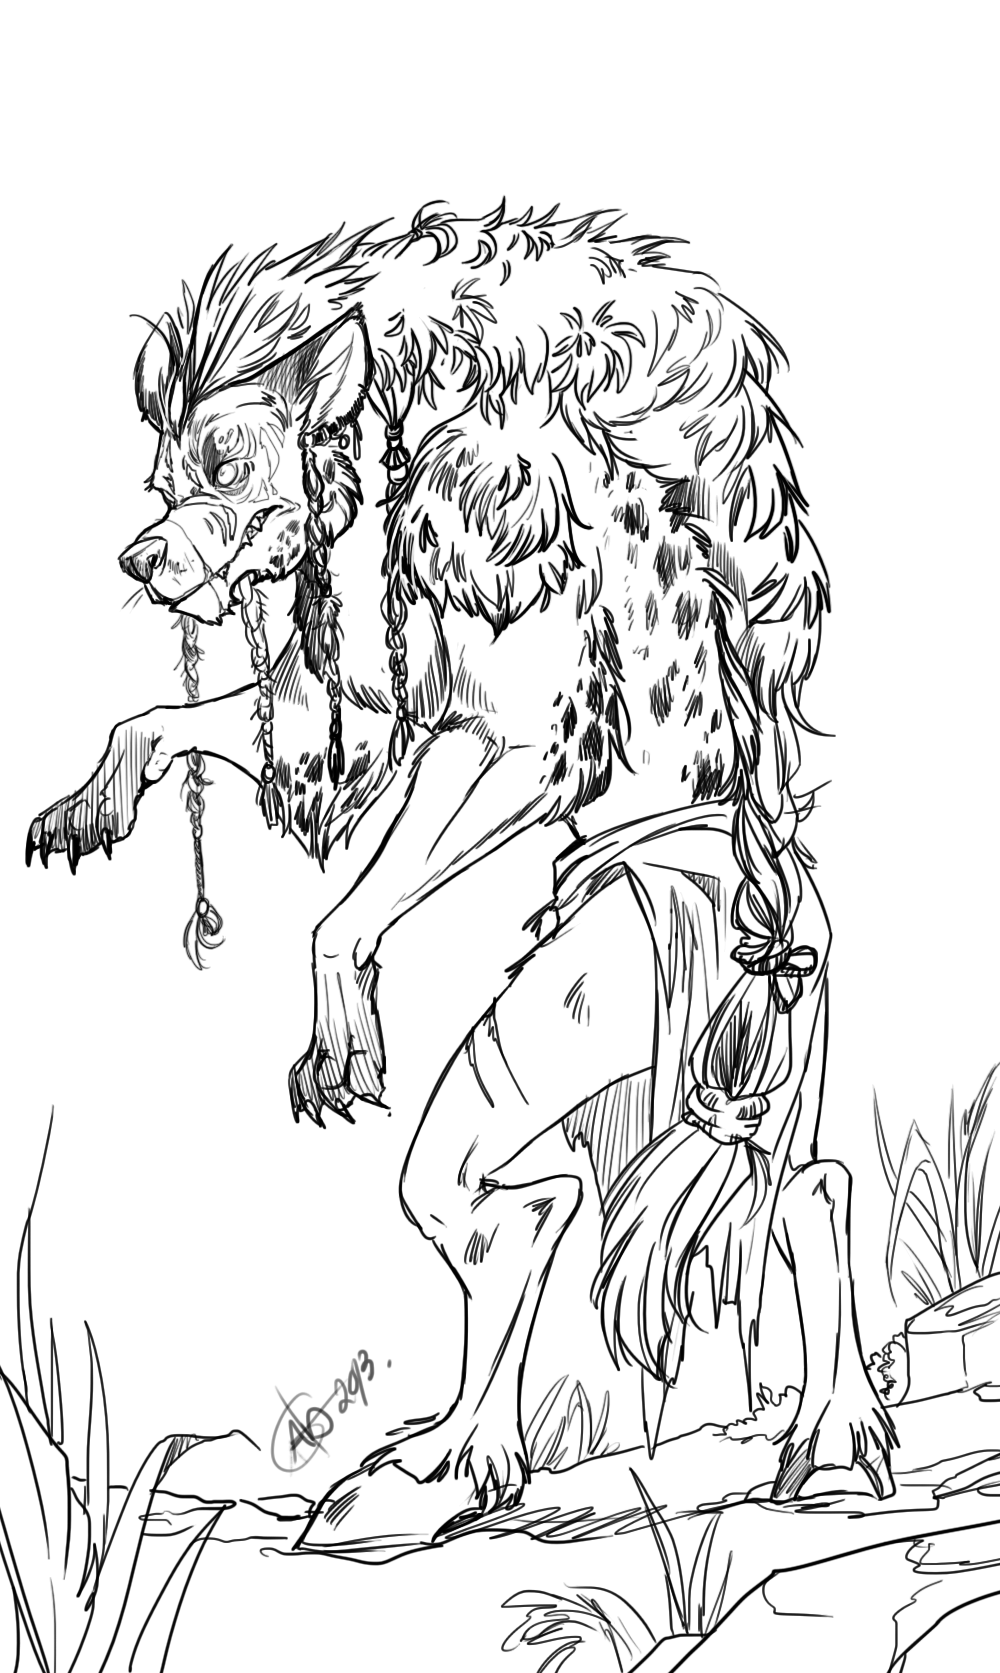 Hyena Coloring Pages Scary Image For Adult | Coloring.Cosplaypic.com